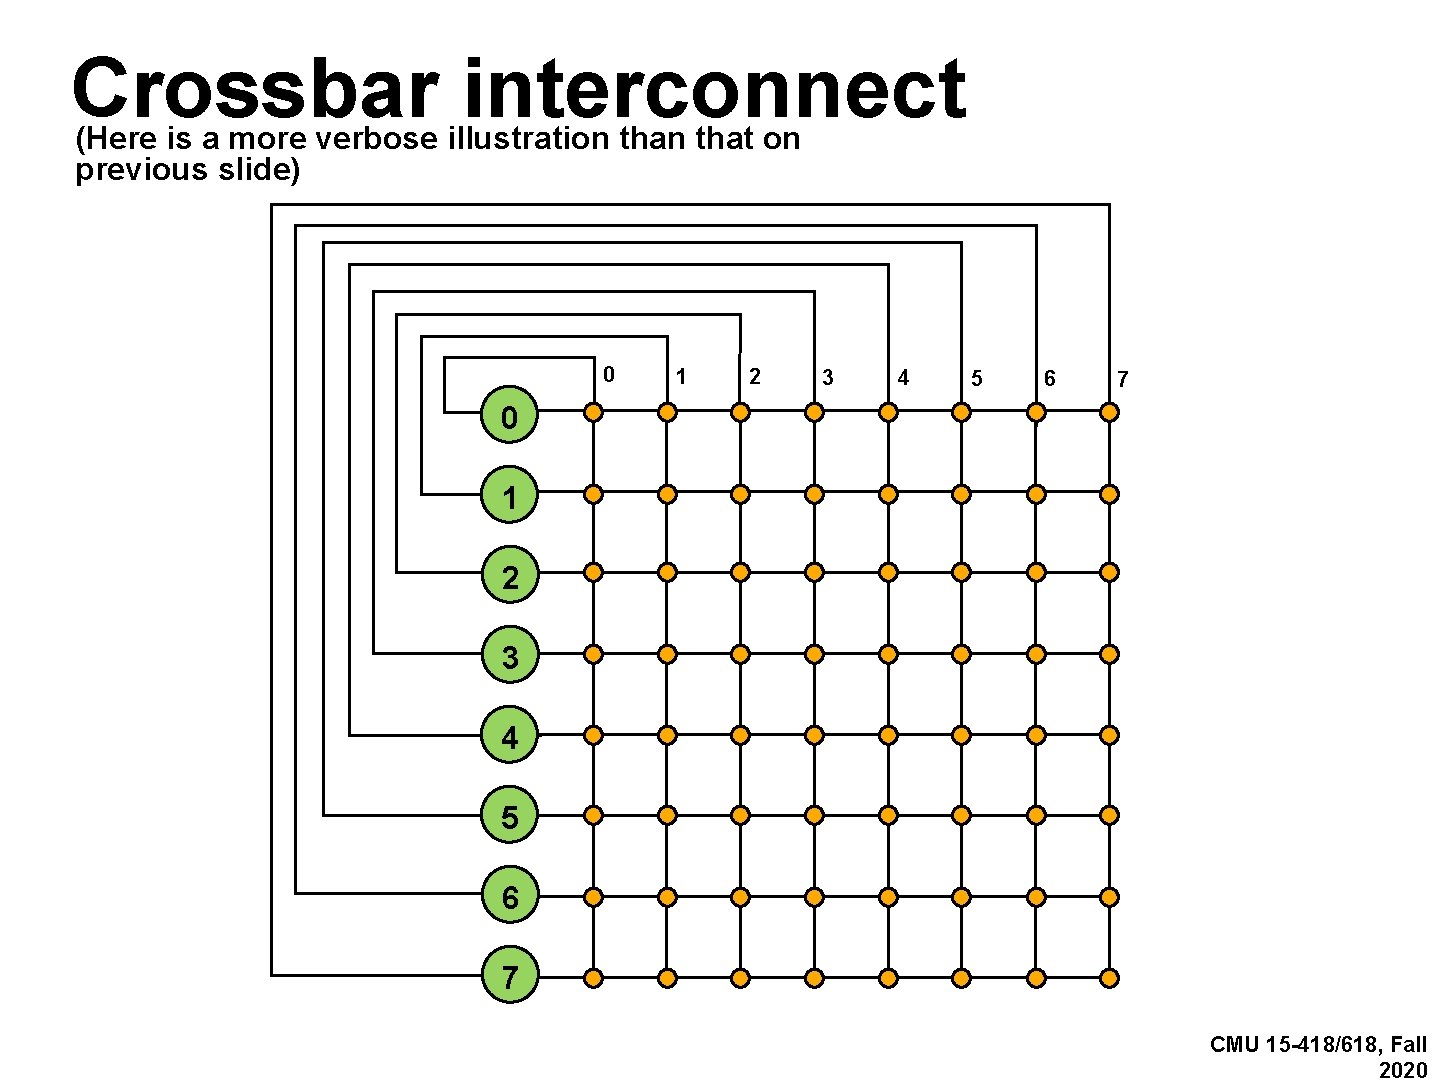 Crossbar interconnect (Here is a more verbose illustration that on previous slide) 0 1